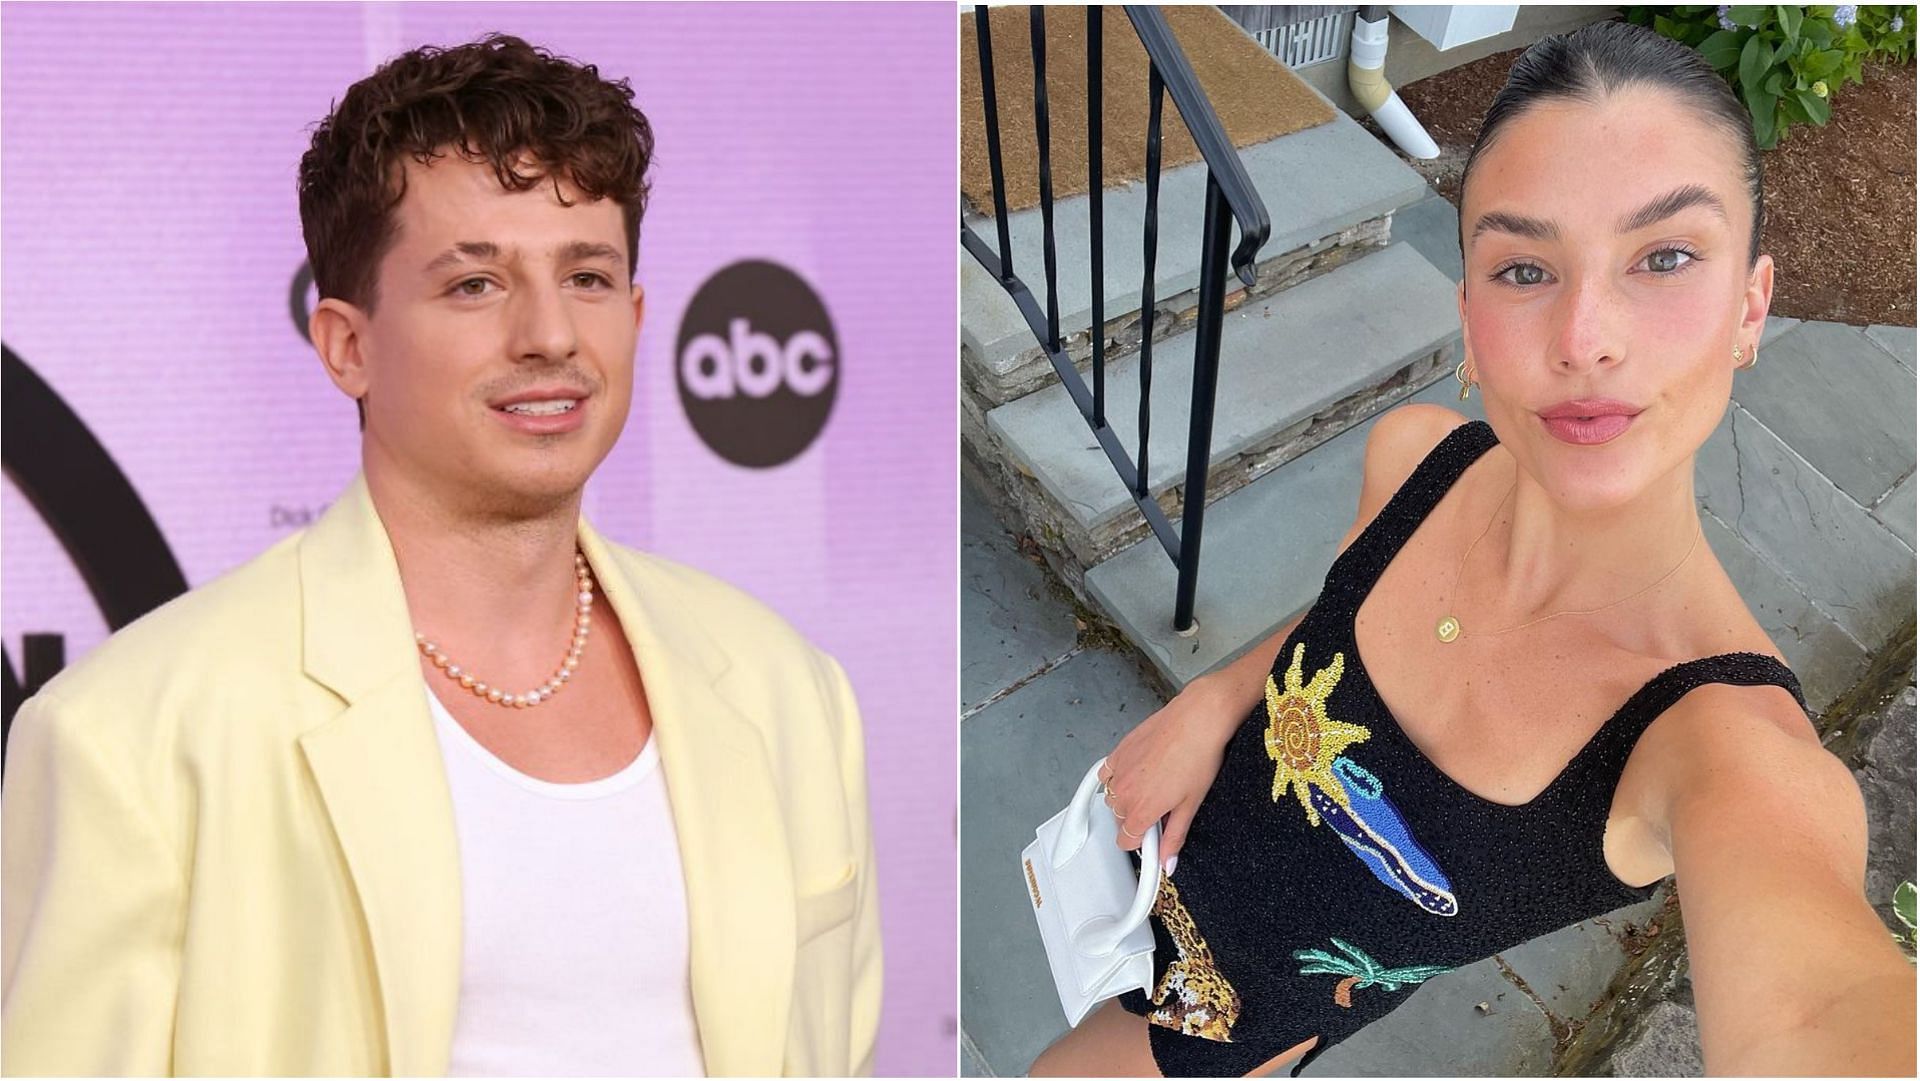 Charlie Puth hinted towards his romance with Brooke Samson (Image via Taylor Hill/Getty Images and brookesansone/Instagram)